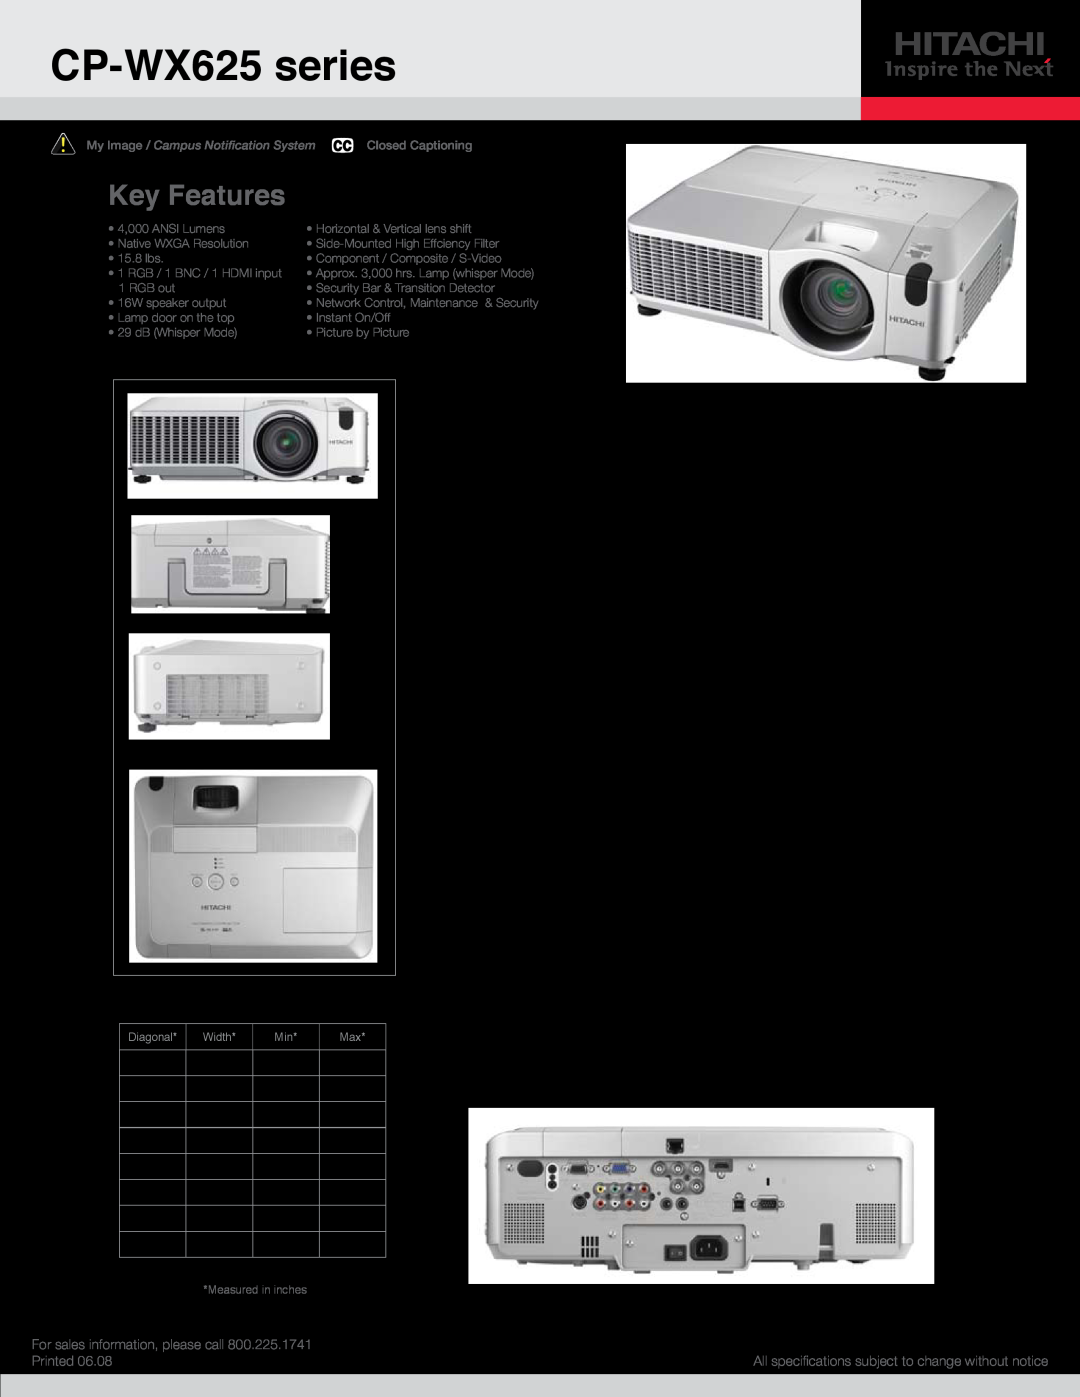 Hitachi specifications CP-WX625 series, Key Features, Specifications, Screen Size, Throw Distance, Printed, Diagonal 